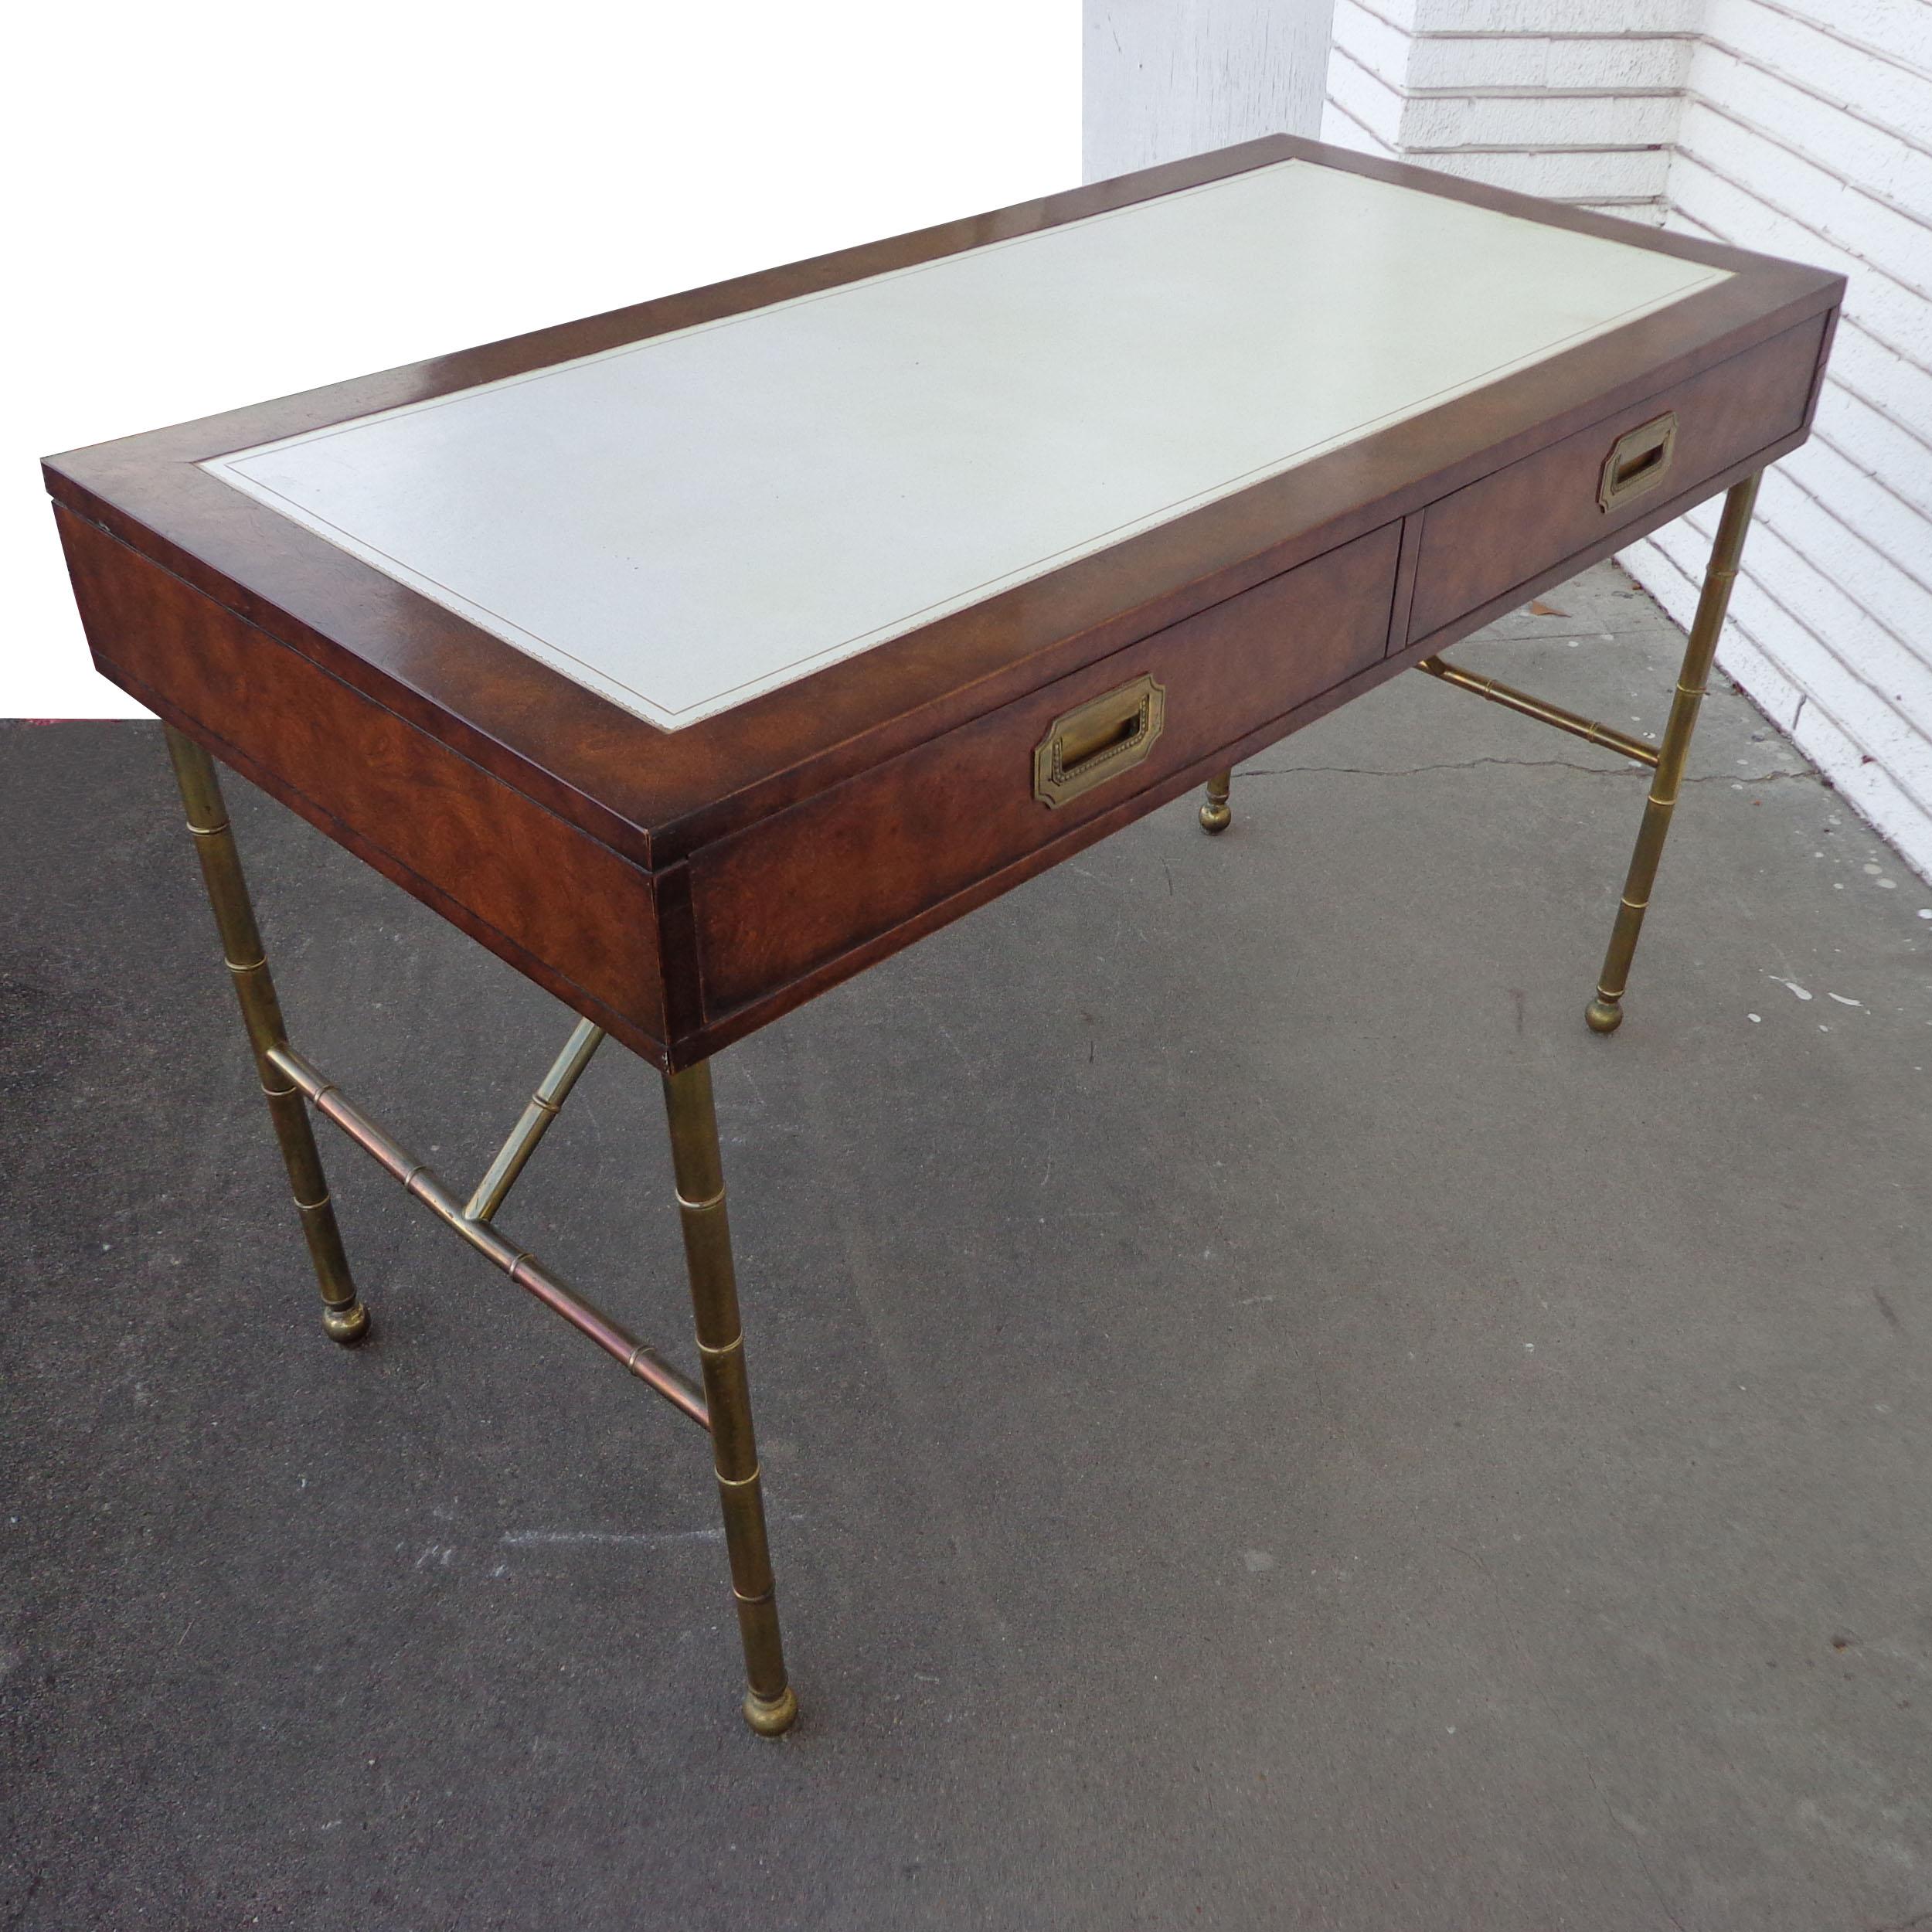 Mastercraft campaign writing desk

Beautiful burl case and brass faux bamboo legs. Two drawers with brass pulls. Top is a tooled off-white leather. Measure: 48